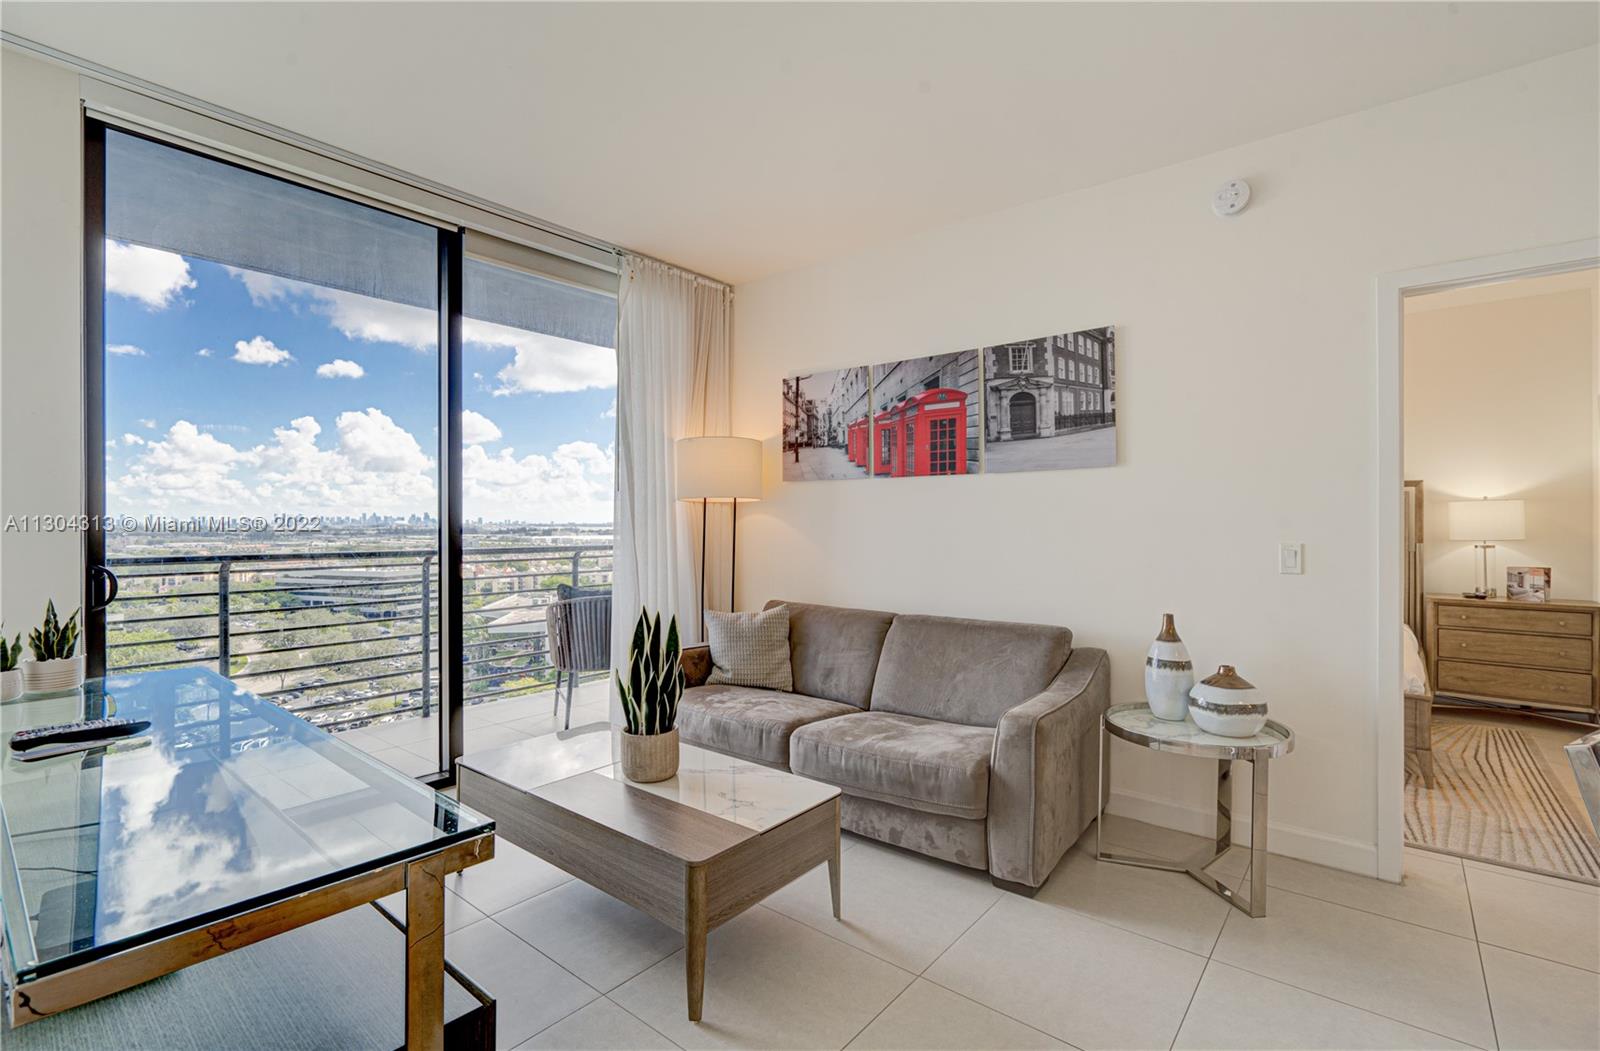 Welcome to this beautiful residence in the heart of Downtown Doral! It is located within steps of schools, restaurants, shops, park, golf course and more. This condominium has two separate entrances so it can be a 2/2 home or a one bedroom condo with living room, full kitchen plus washer/dryer and a separate studio with coffee maker, mini fridge and microwave. You can live in one side and rent the other one or rent/use both. It comes completely furnished and ready to be occupied. It is currently in the short term rental program with a management office onsite.